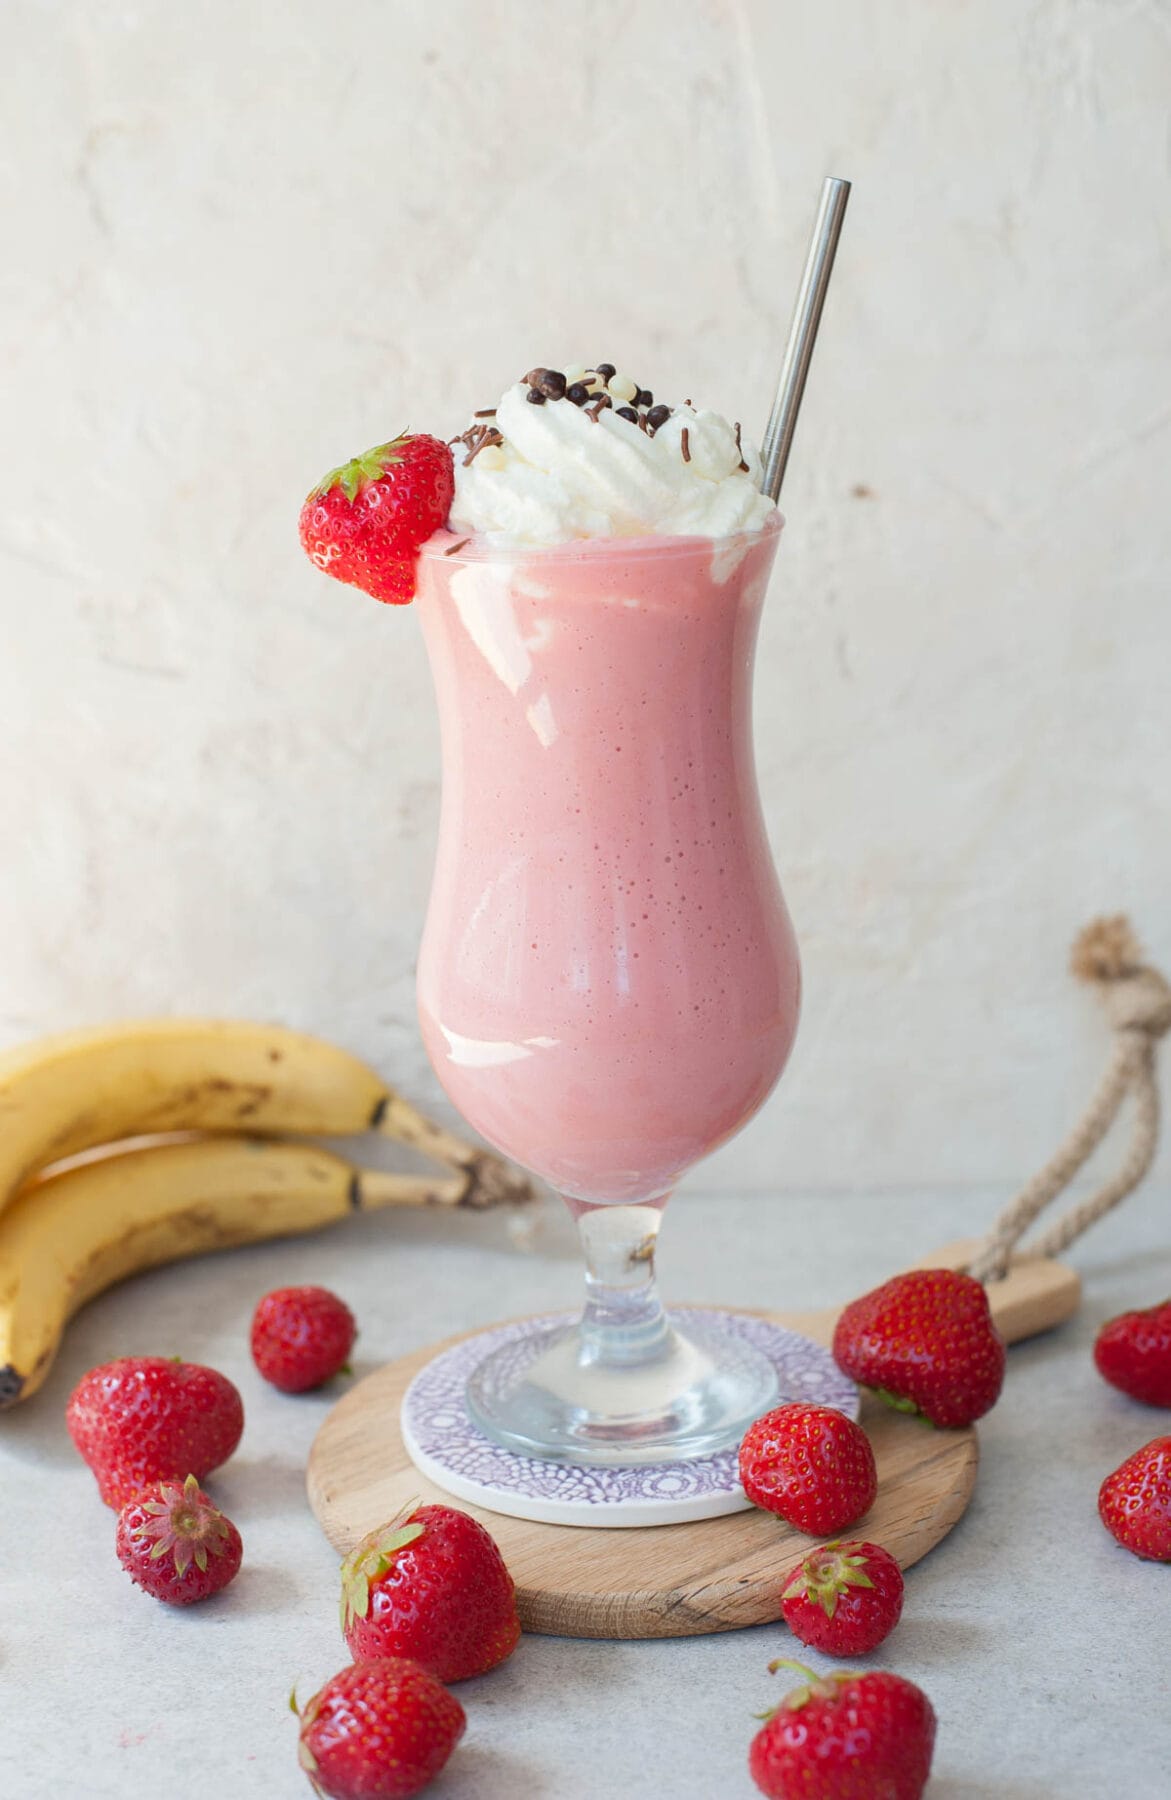 Strawberry banana milkshake in a highball glass with a straw and whipped cream